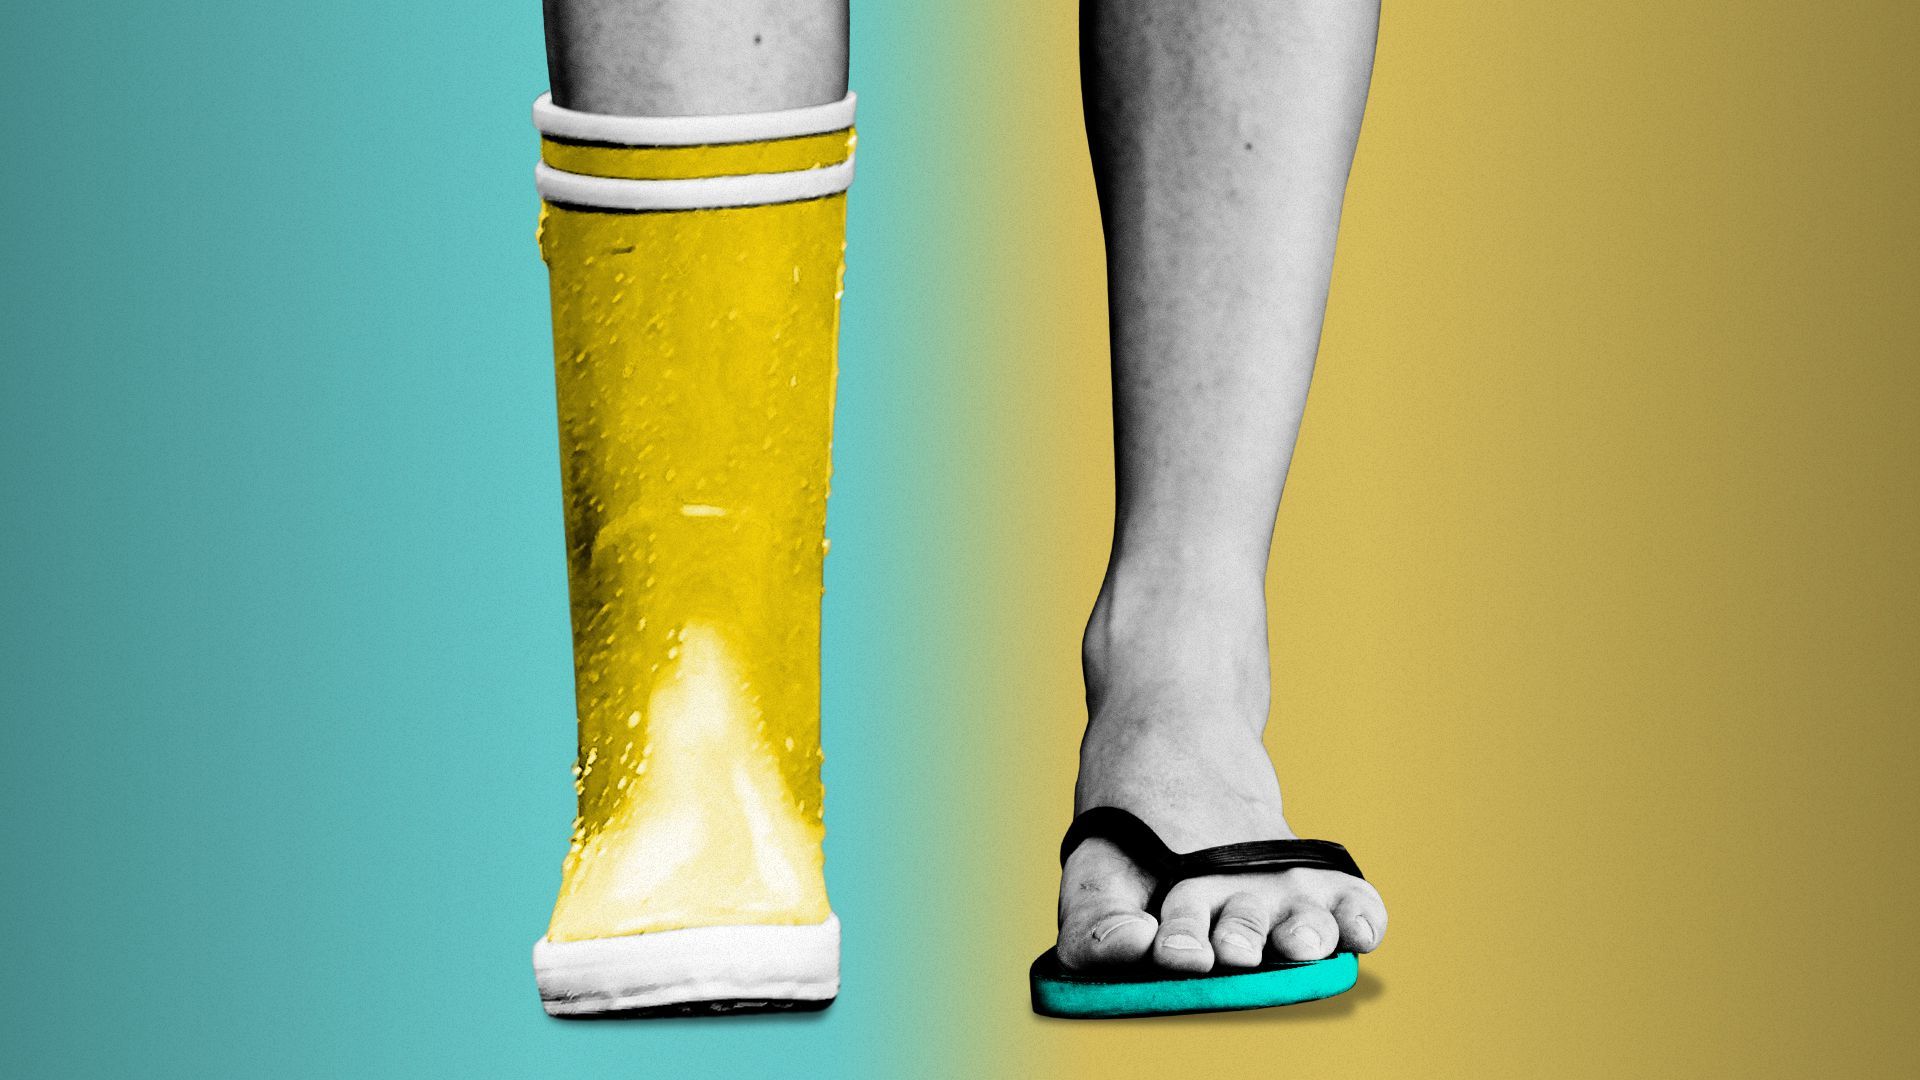 Illustration of a pair of legs with one foot wearing a rain boot and the other wearing a sandal.